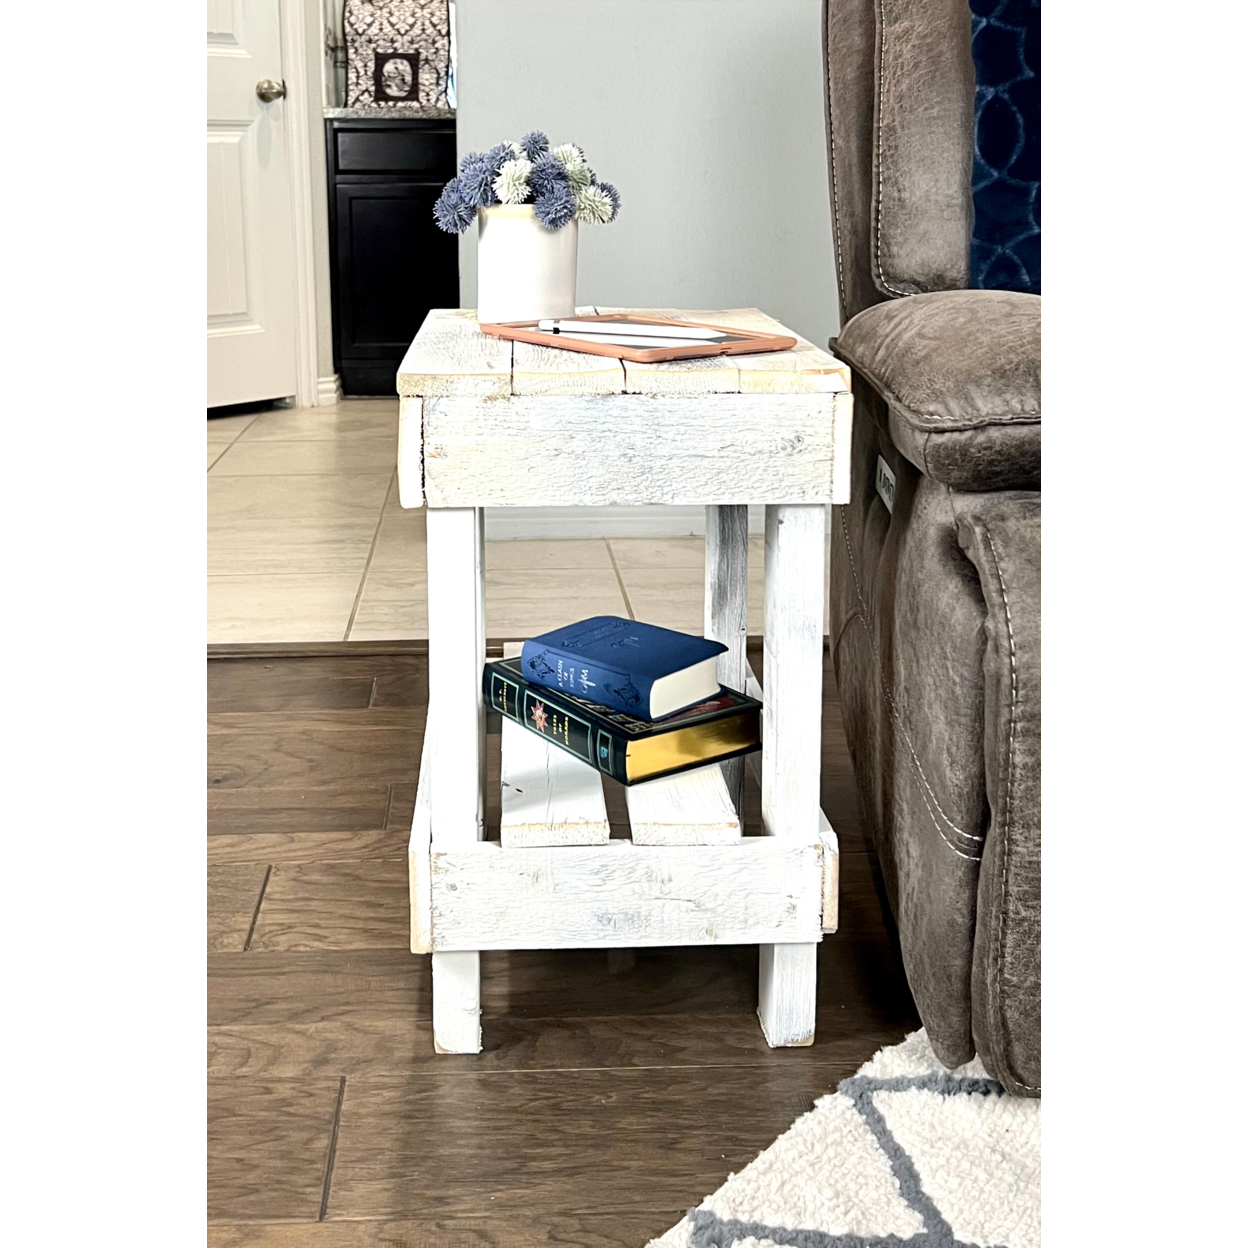 Reclaimed Wood Rustic Bedside or Living Room End Side Table Country Charm Farmhouse Nightstand - White